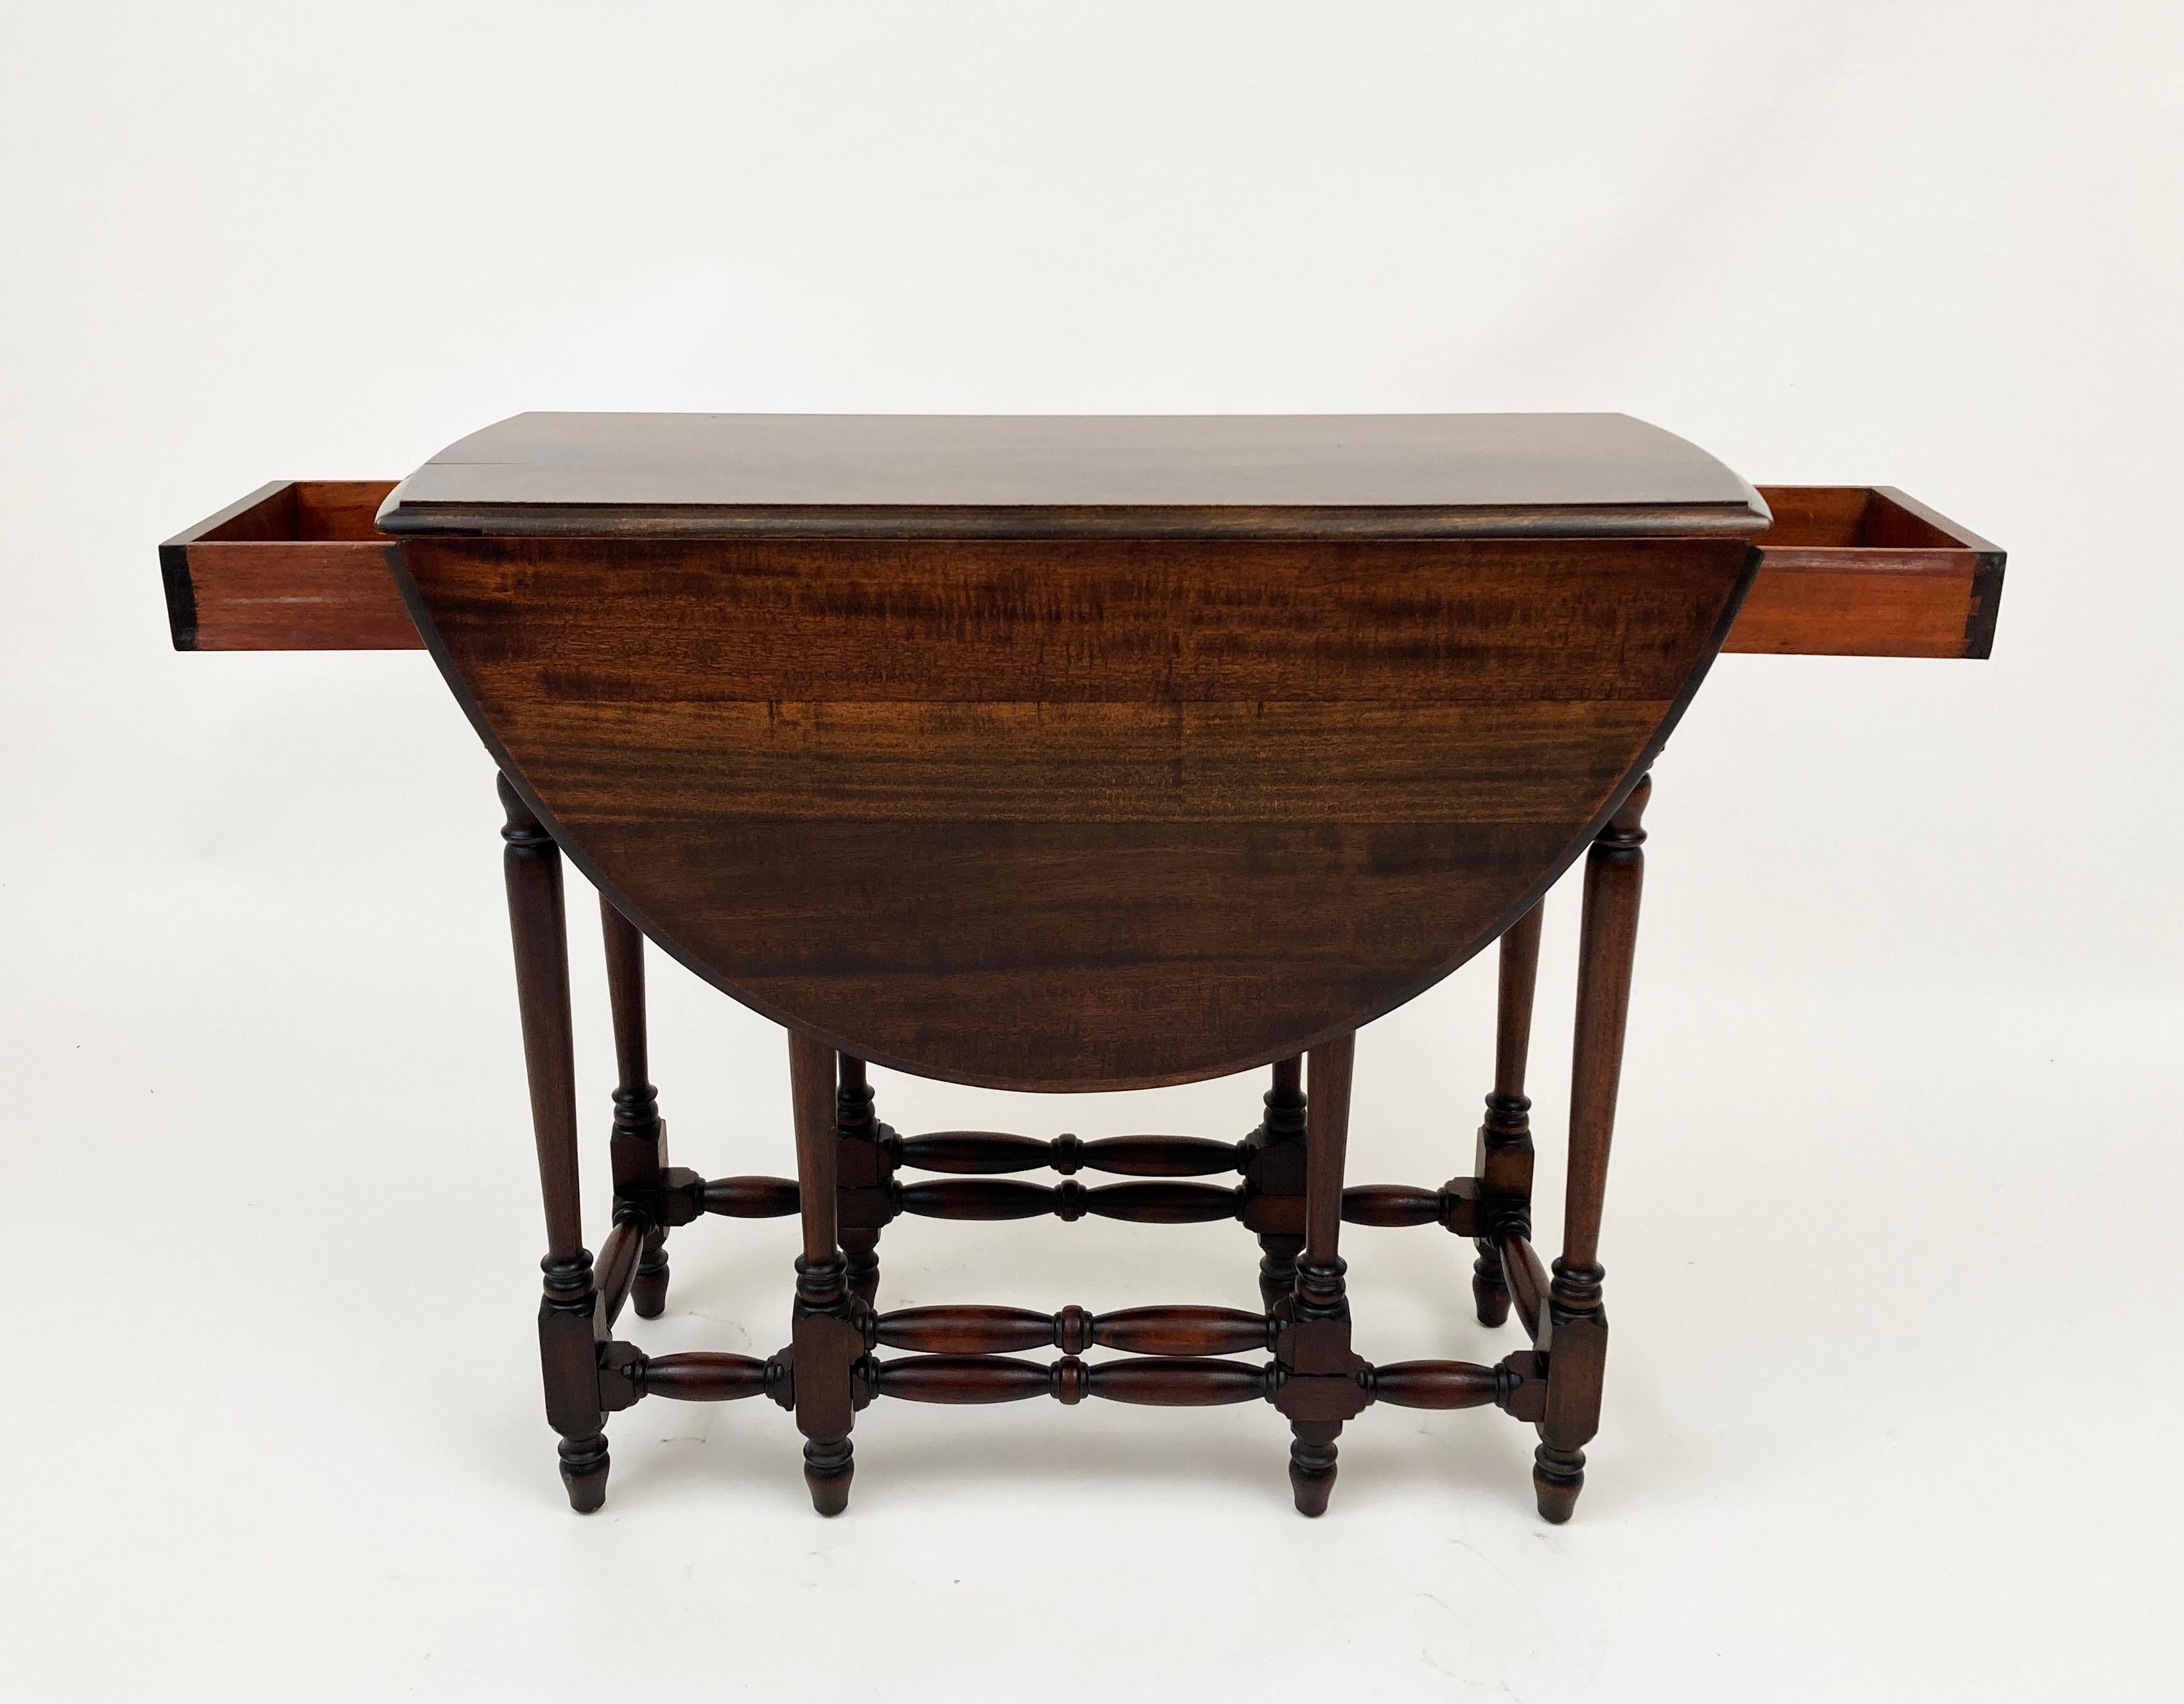 Late 18th Century English William and Mary Drop Leaf Gate-Leg Walnut Table For Sale 6